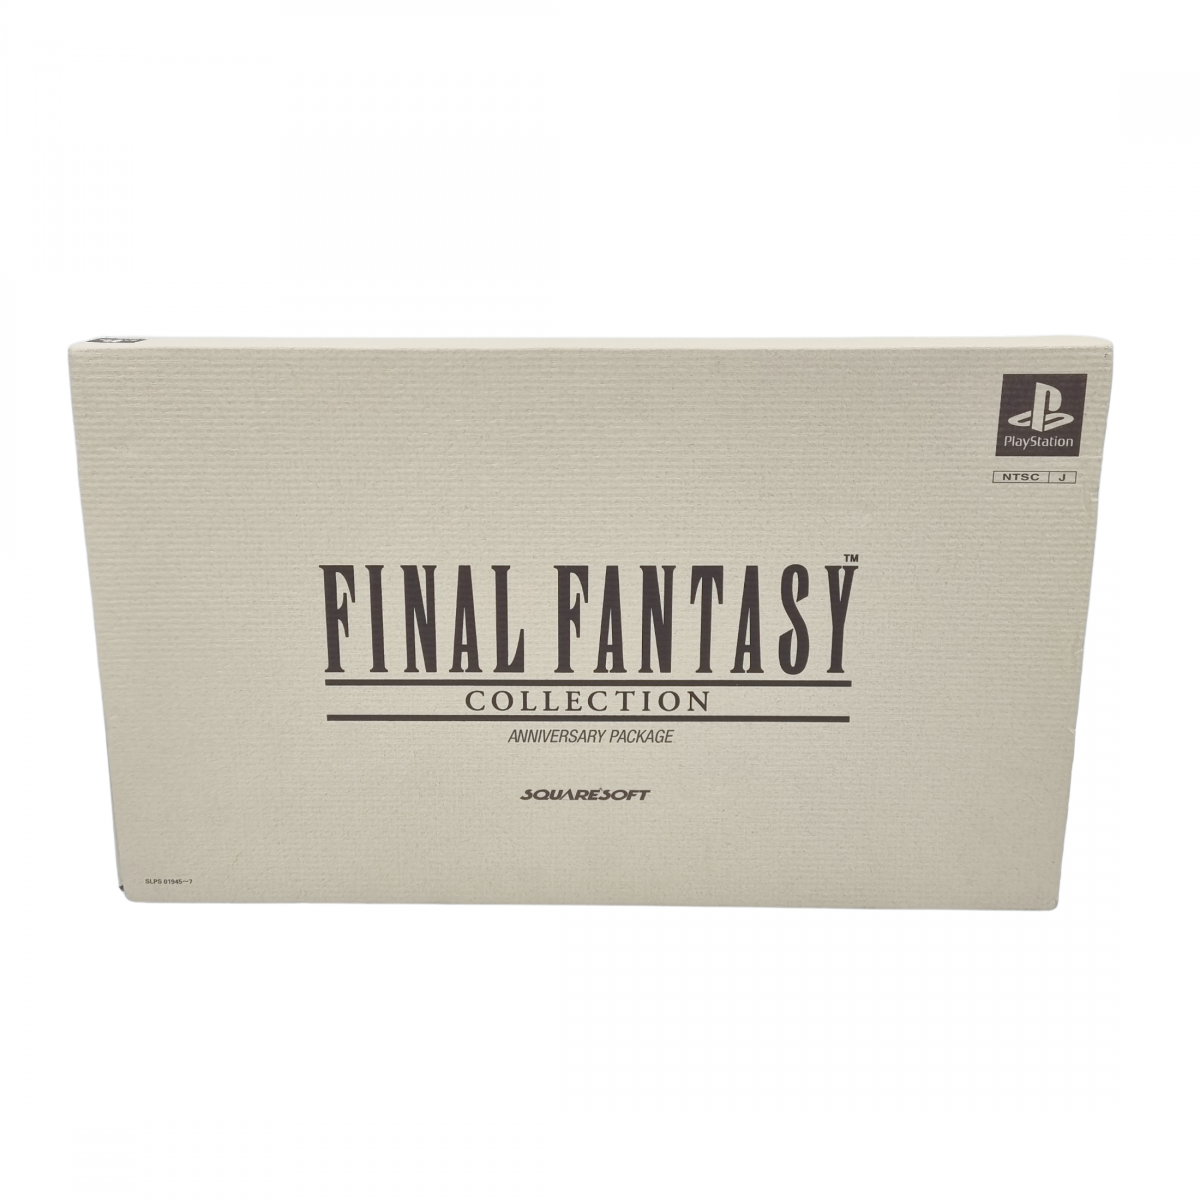 Final Fantasy Collection Anniversary Package - front